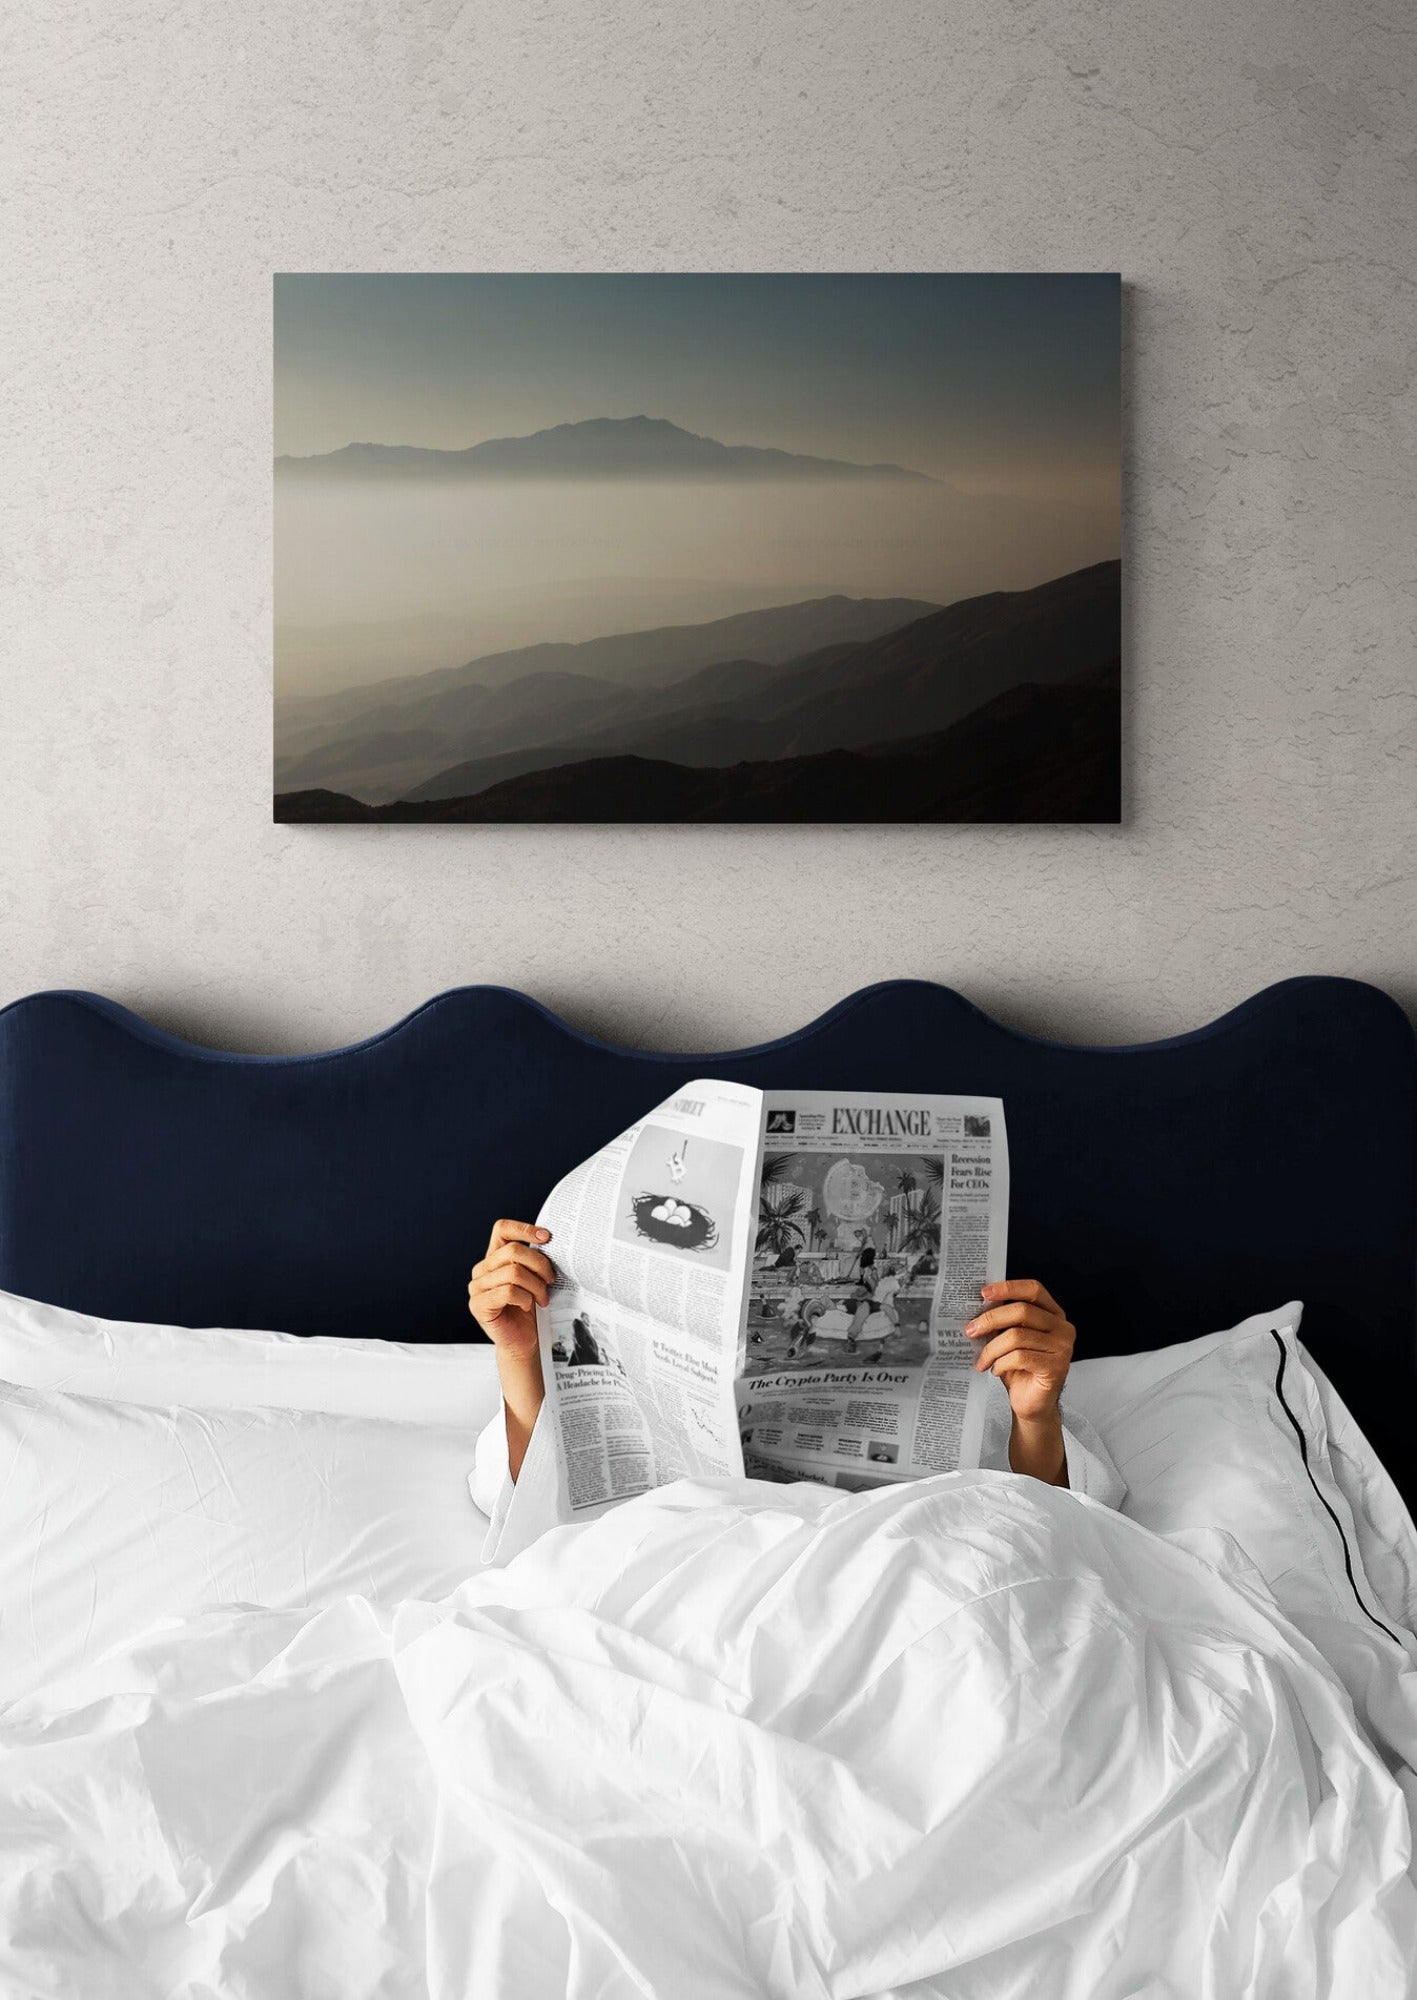 Canvas of a Photograph of California Mountains in a bedroom as wall art